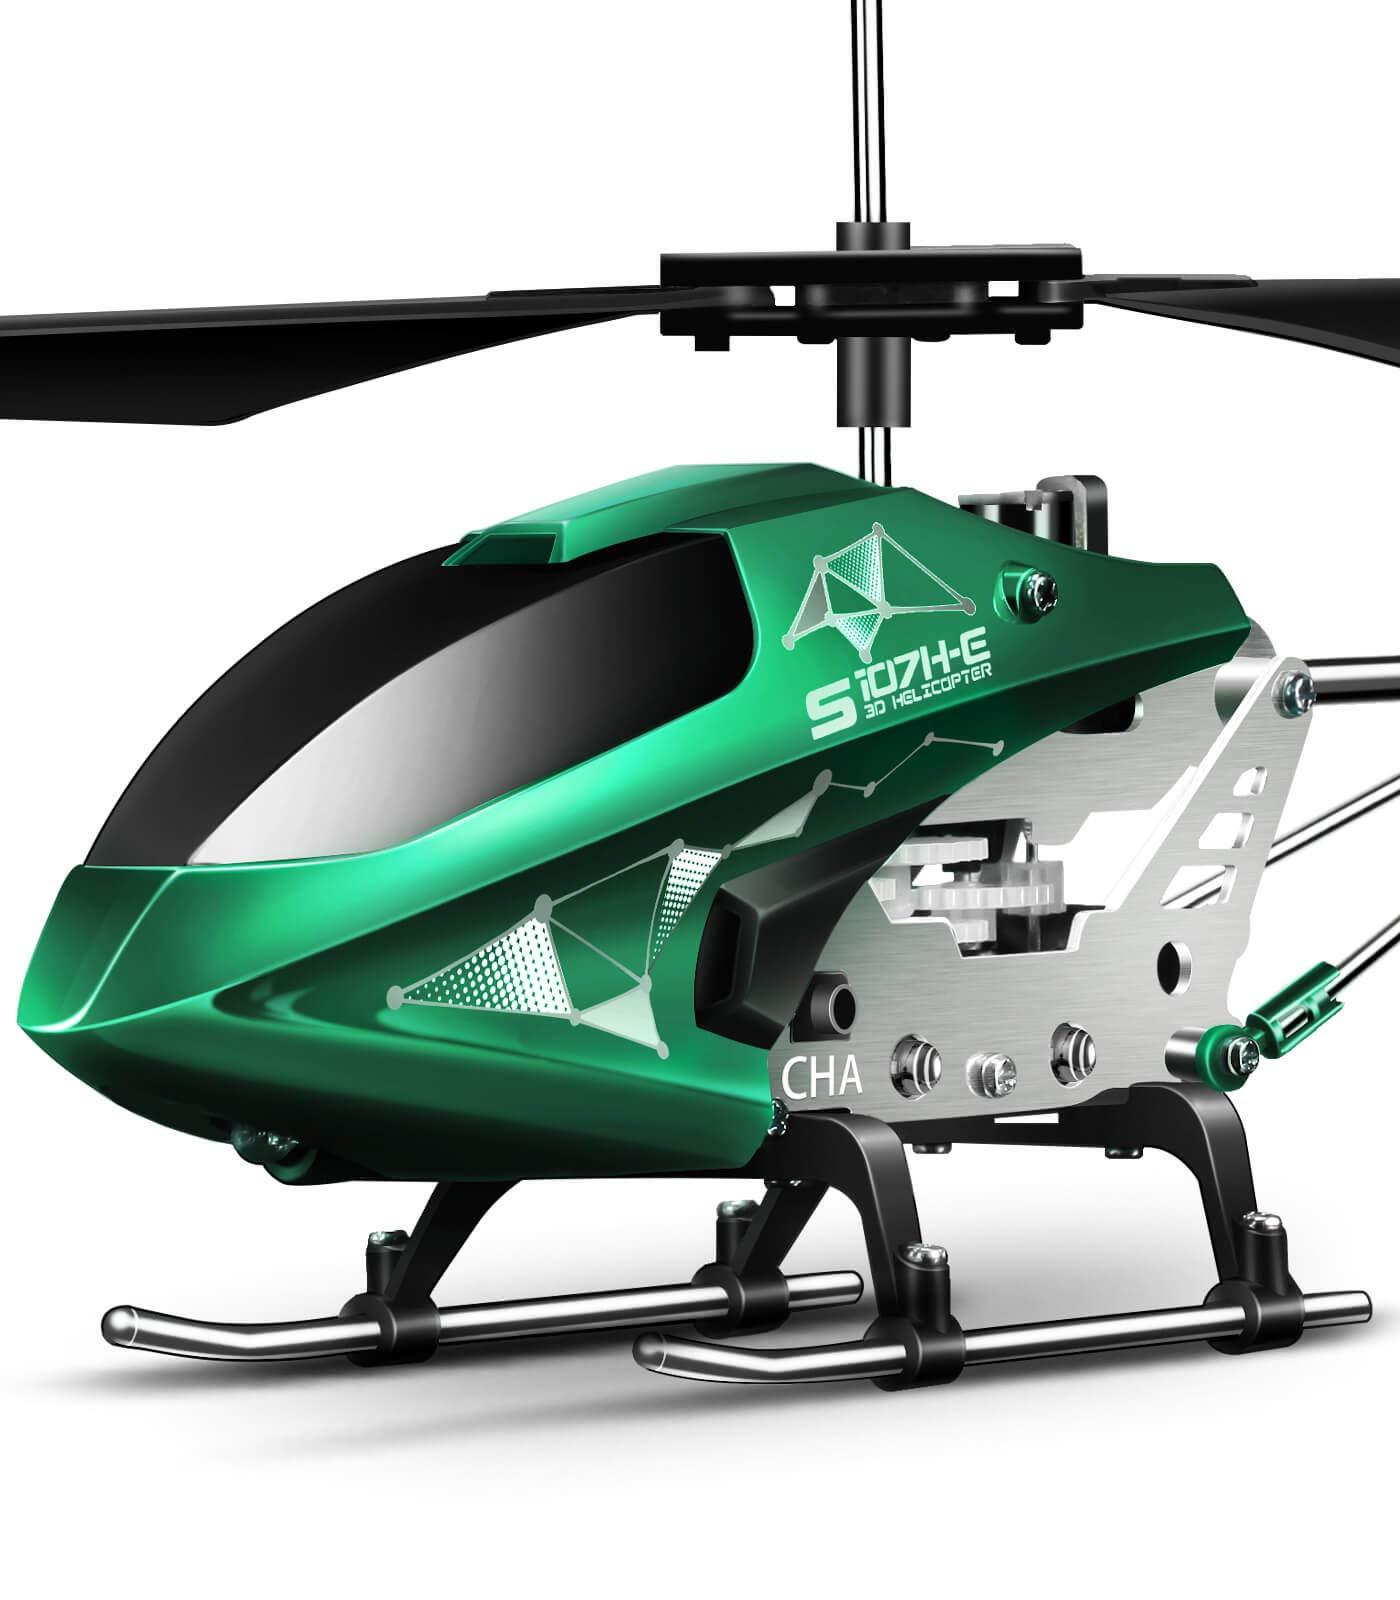 Best Rc Helicopter On Amazon: Top RC Helicopters on Amazon